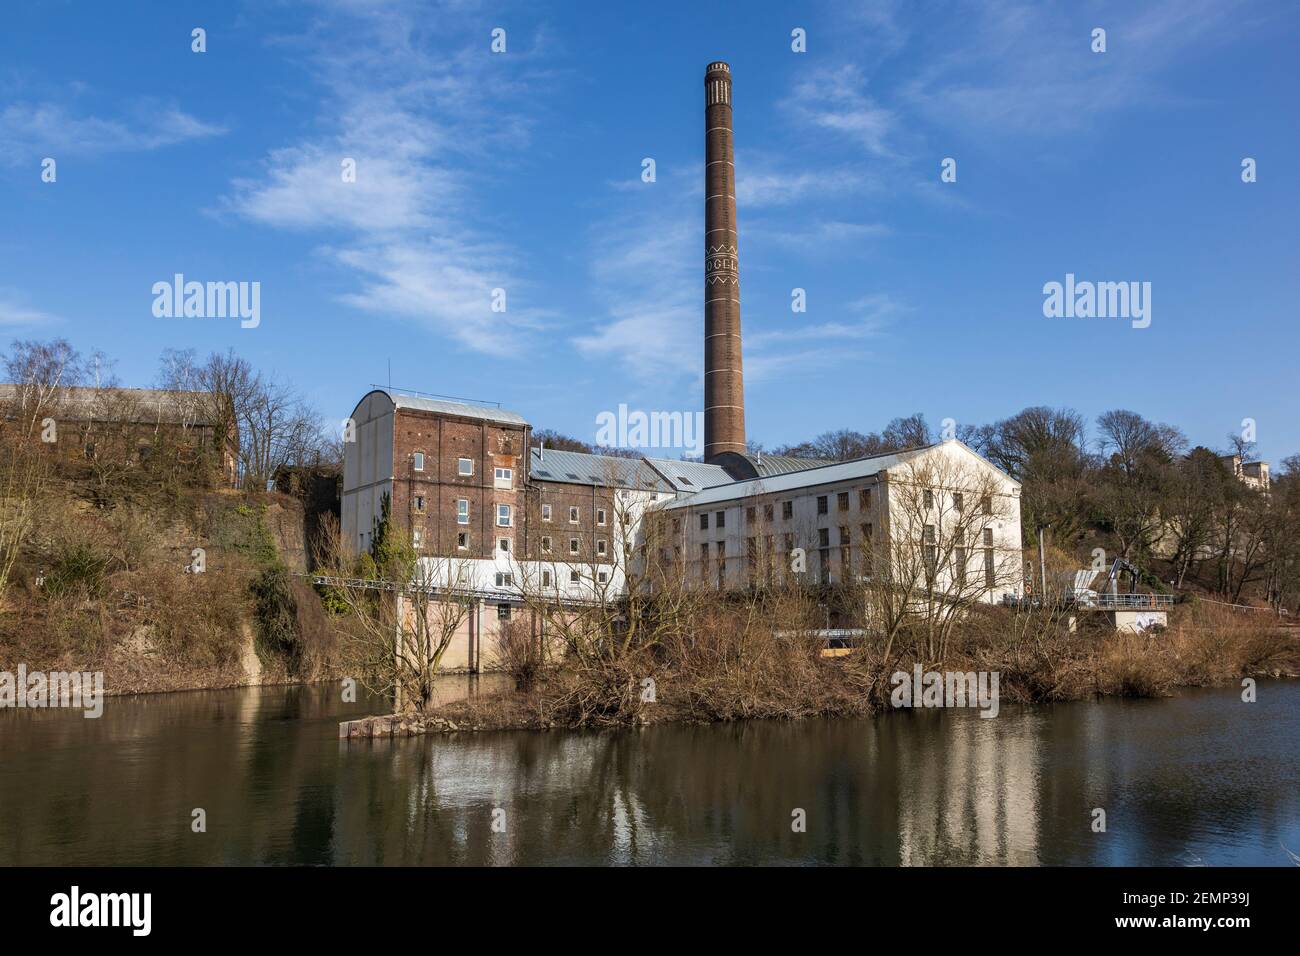 Hydro-electric power station Horster Mühle on the river Ruhr in Essen, Germany. Stock Photo